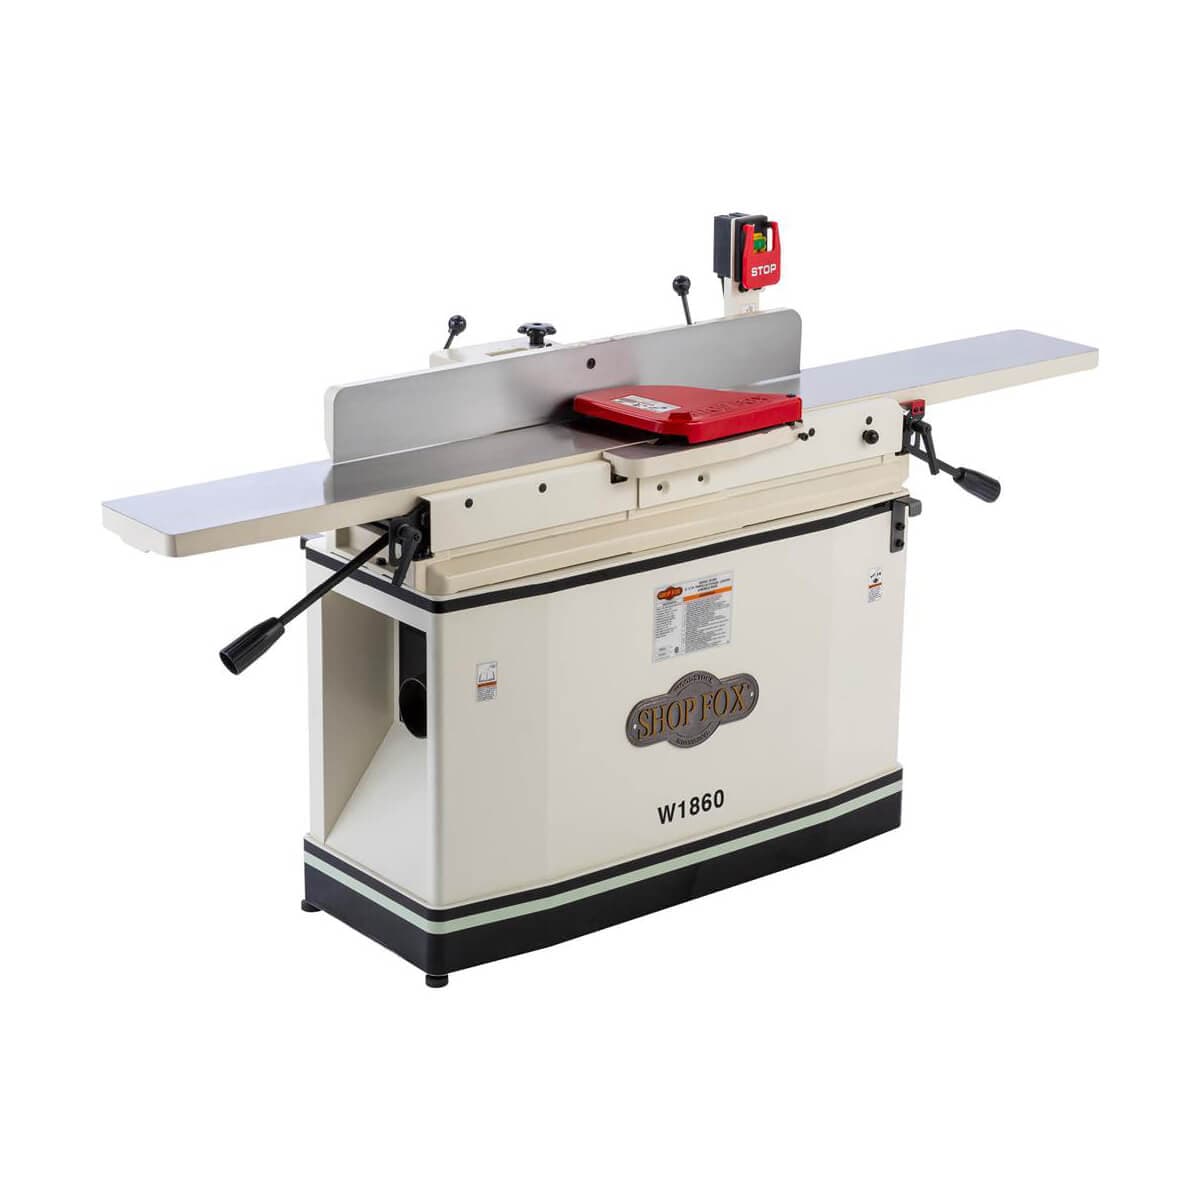 Shop Fox W1860 Jointer 8" Parallelogram Jointer with Helical Cutterhead